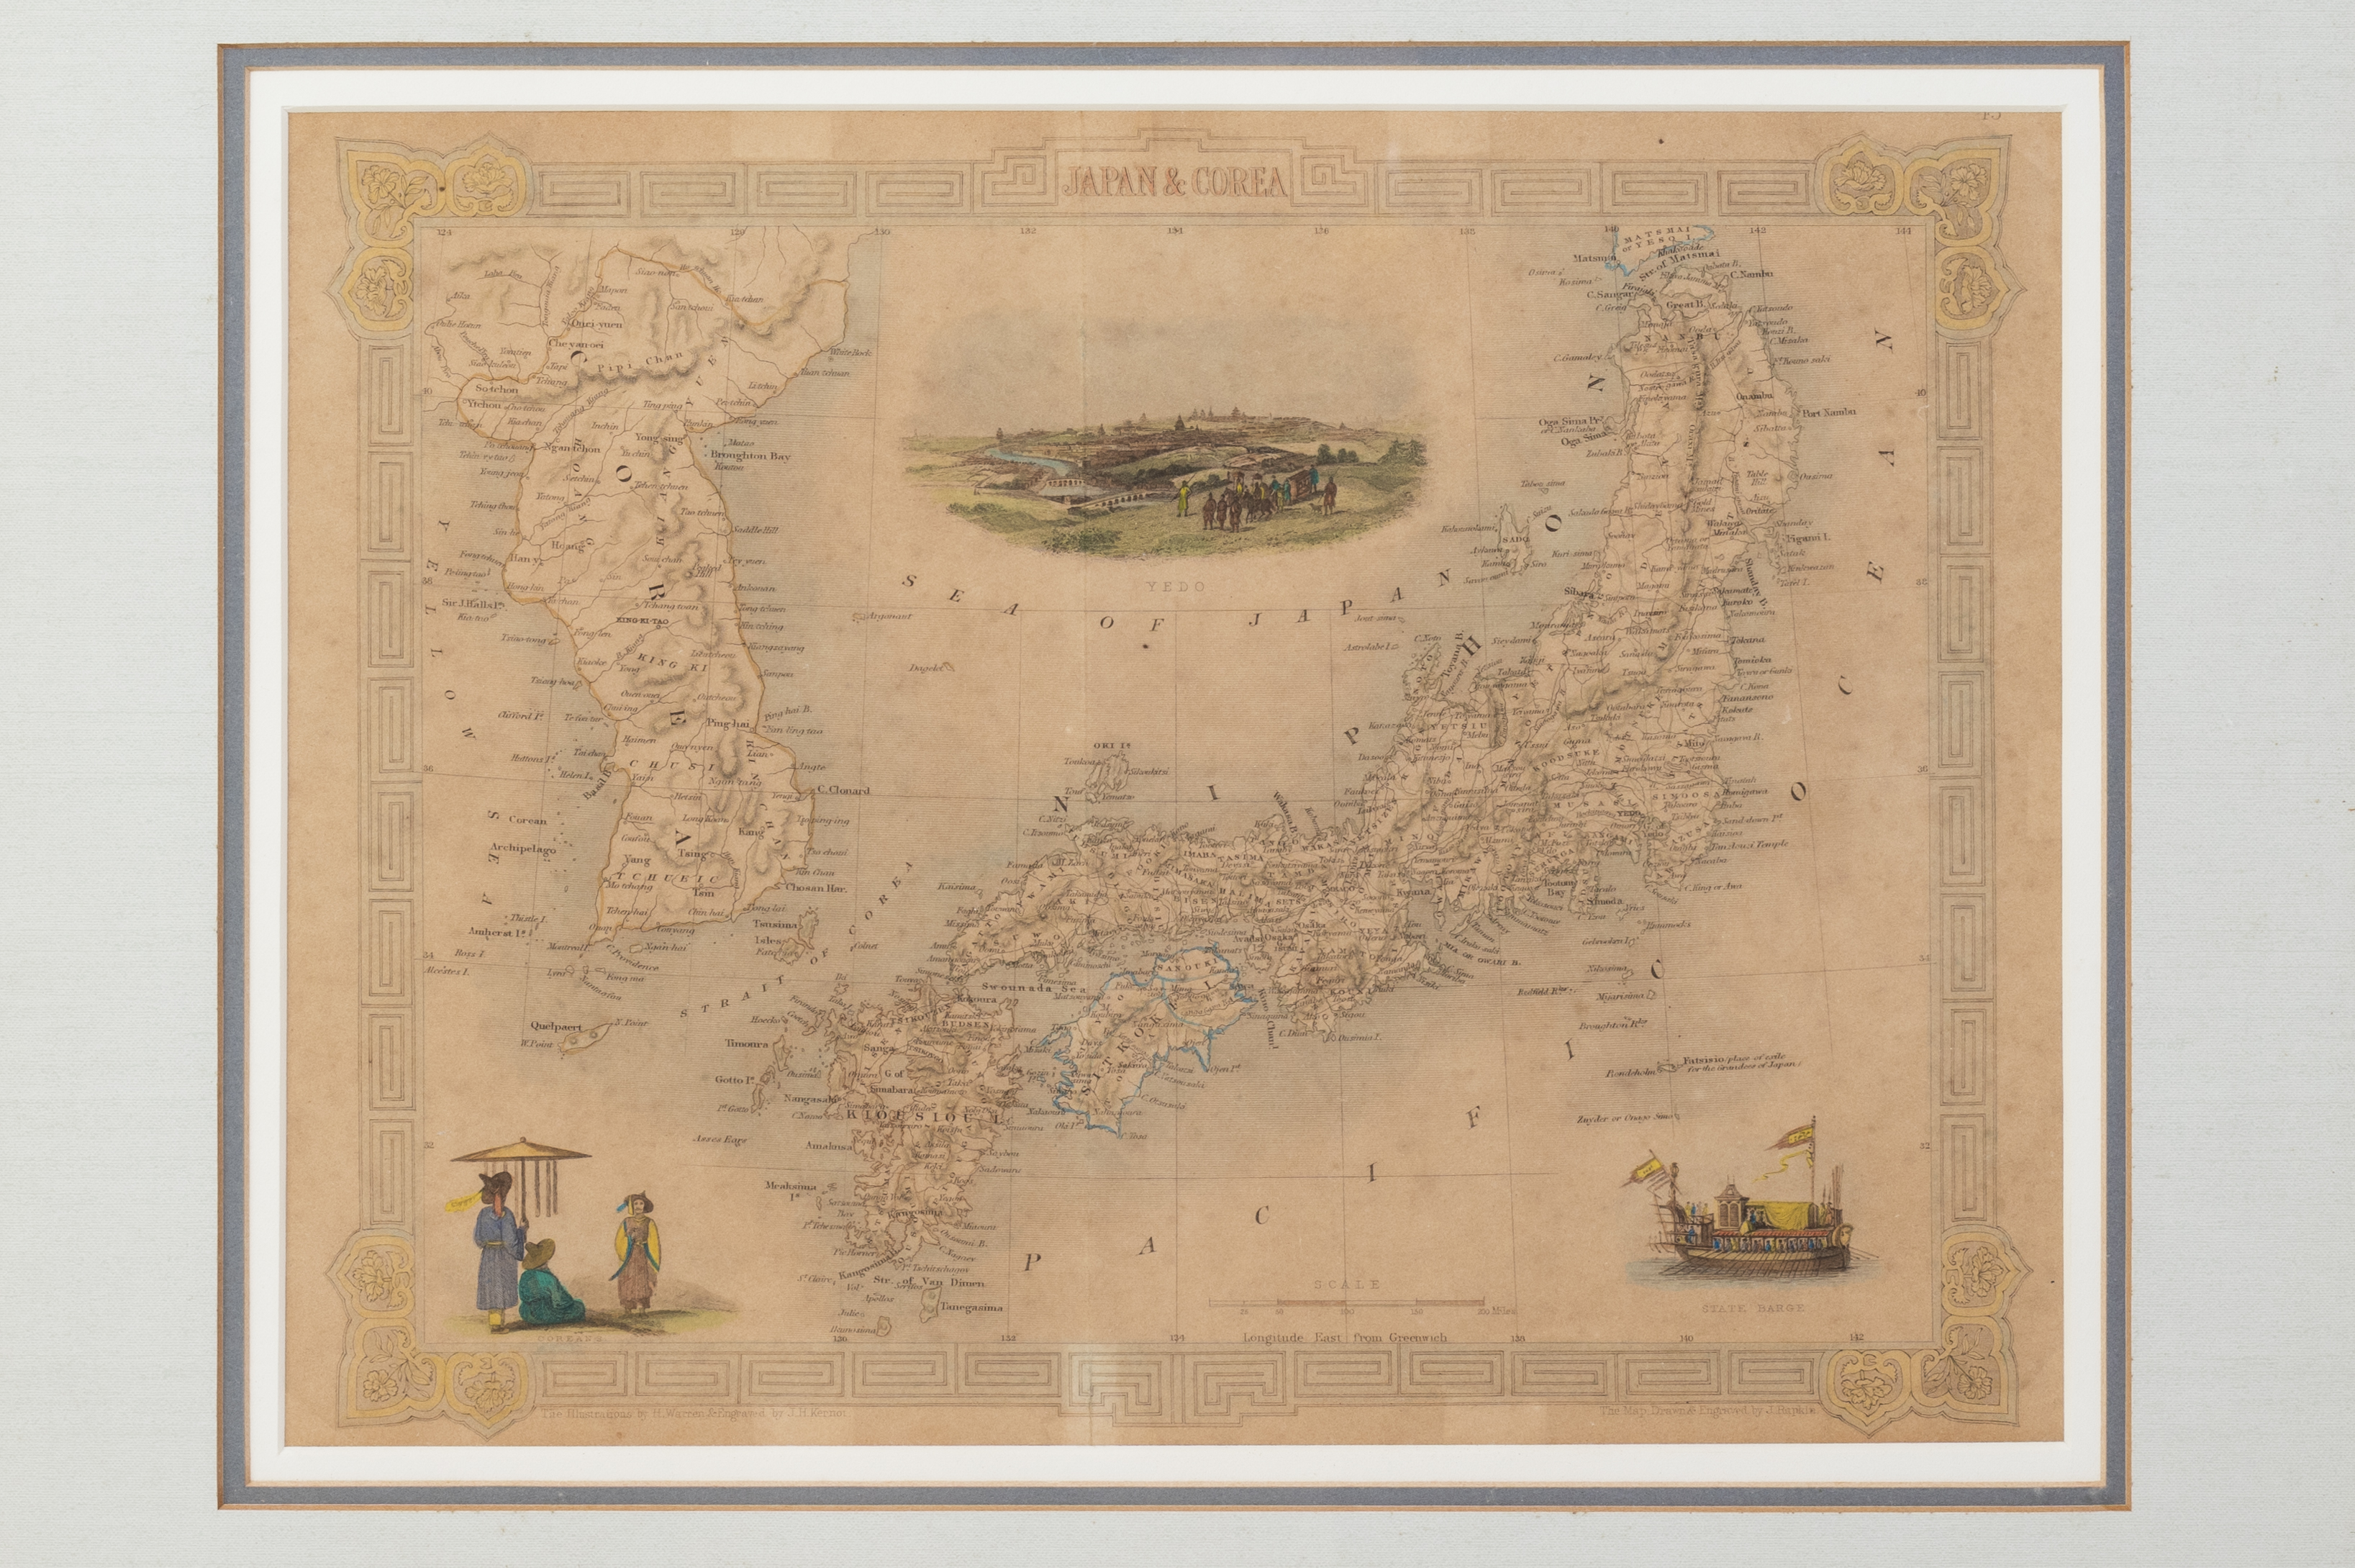 A MAP OF JAPAN AND COREA (1851) - Image 3 of 3